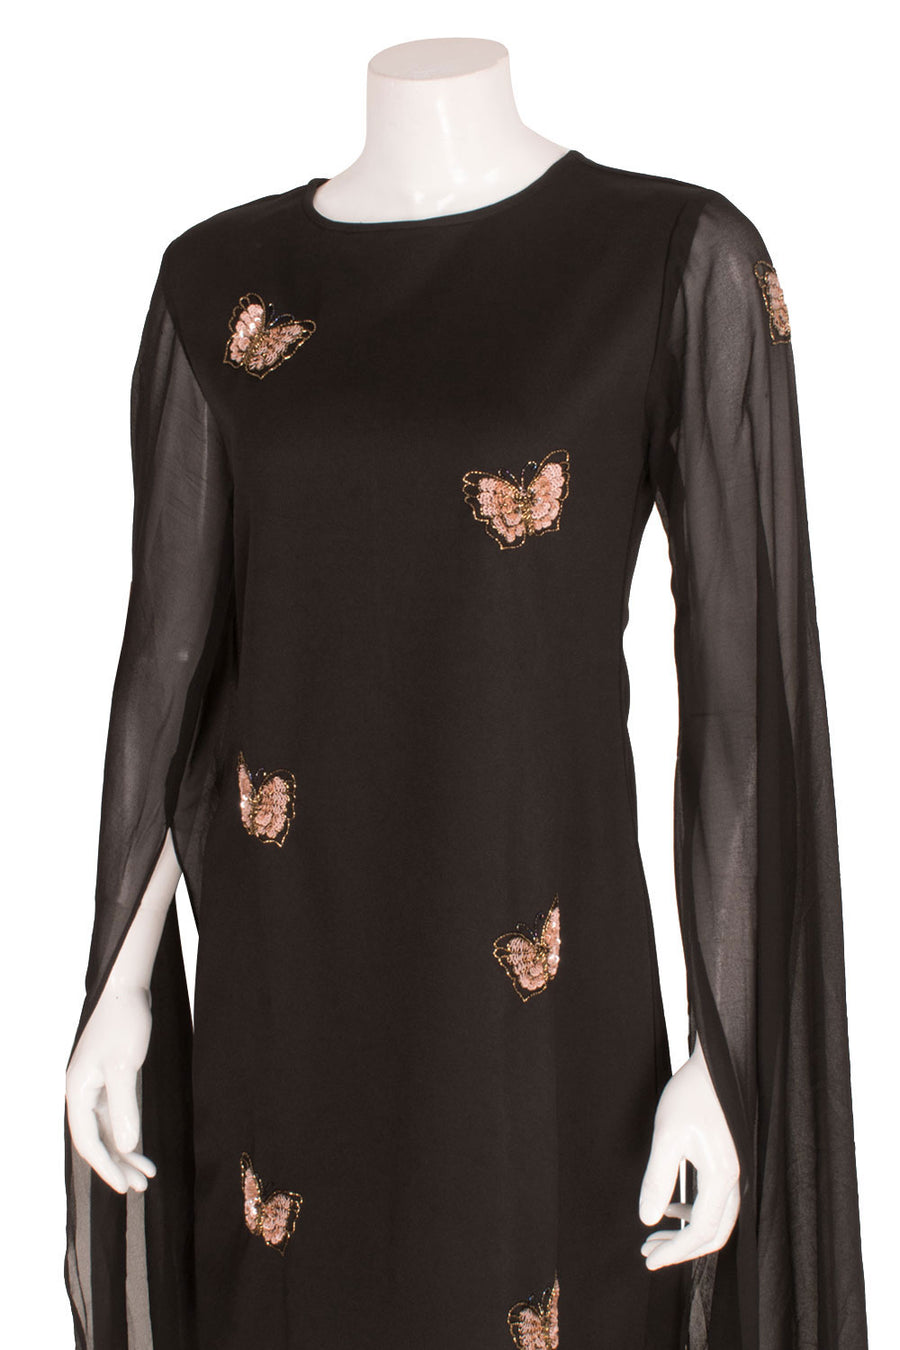 Handcrafted Vicose Cotton Sheath Dress with Butterfly Embellished and Slit Sleeves